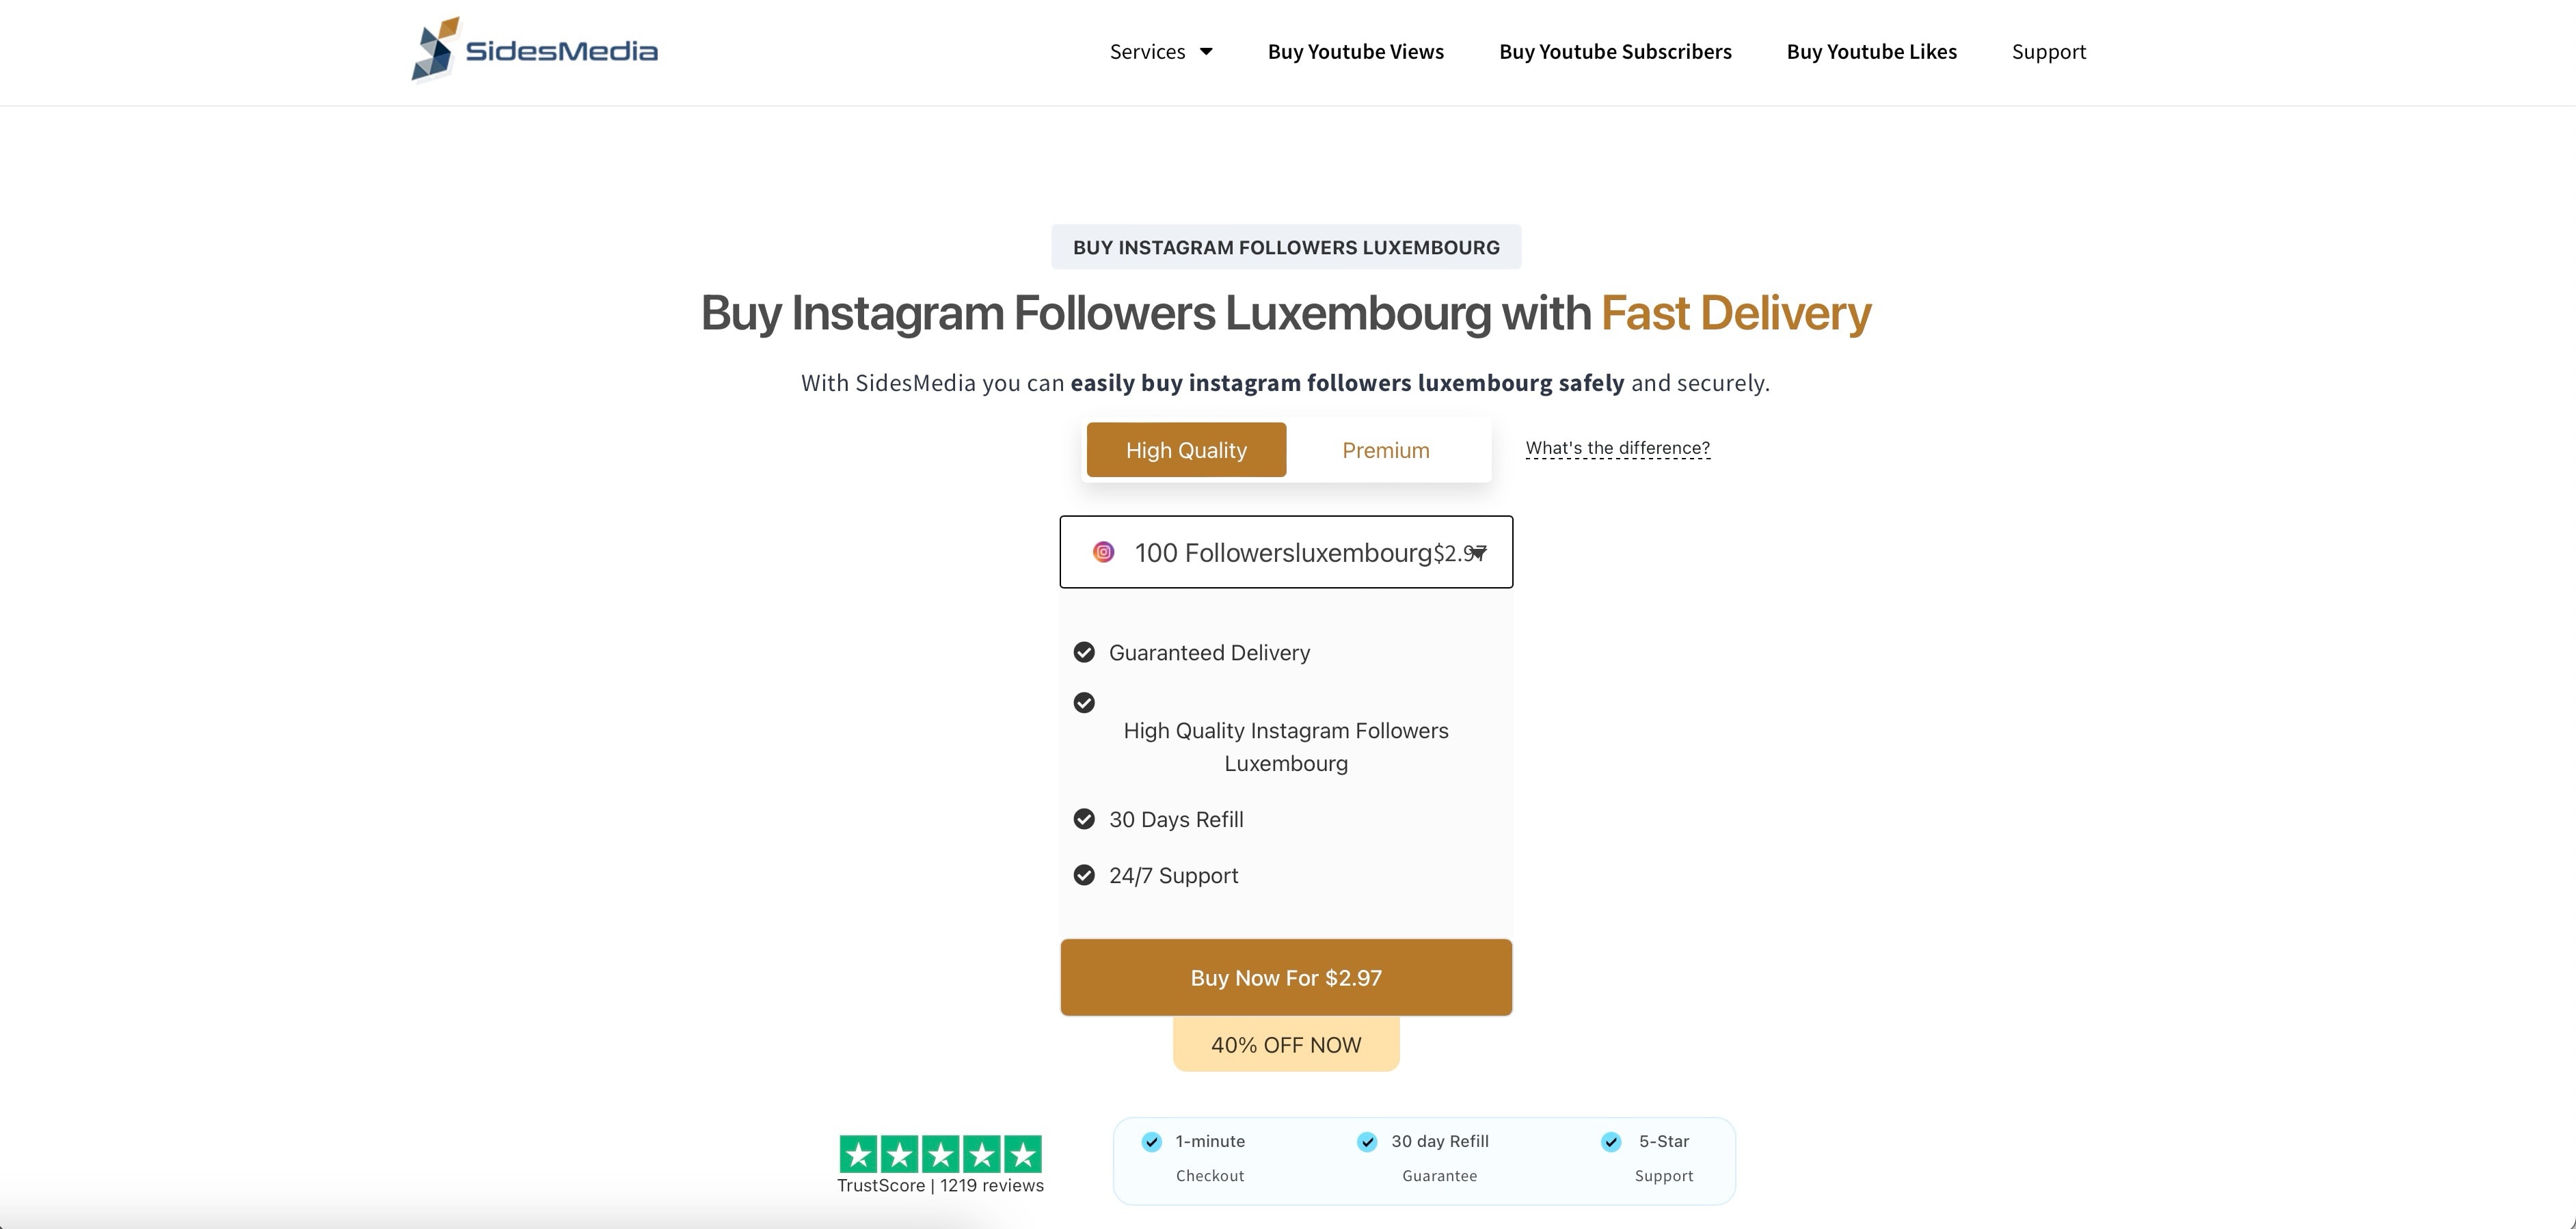 sidesmedia buy instagram followers luxembourg page